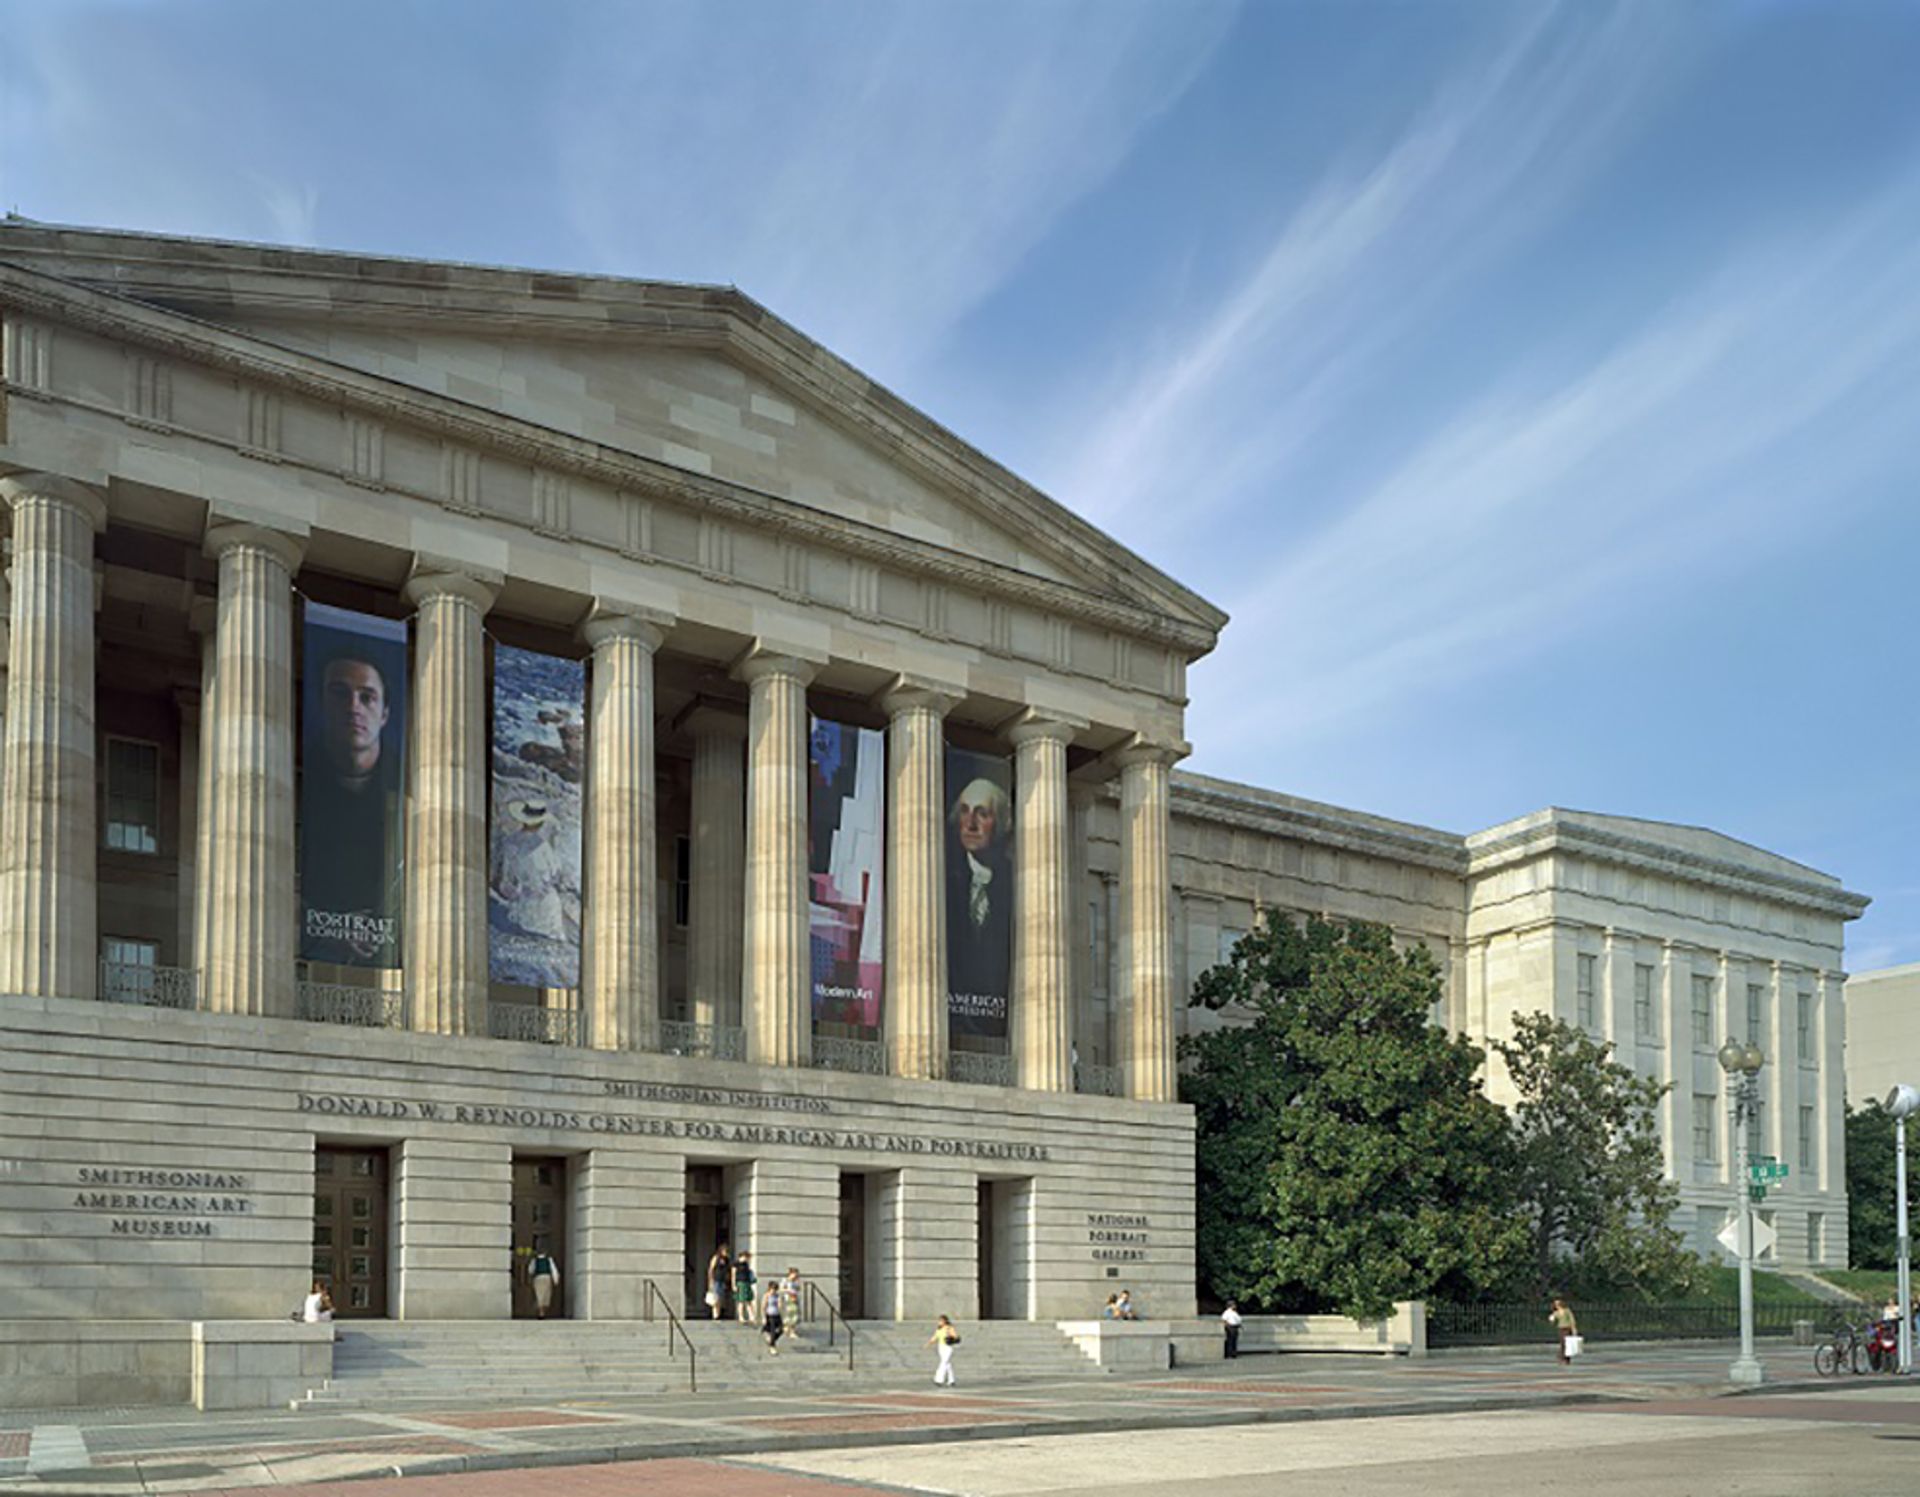 The Smithsonian's National Portrait Gallery in Washington, DC, which had reopened in July 